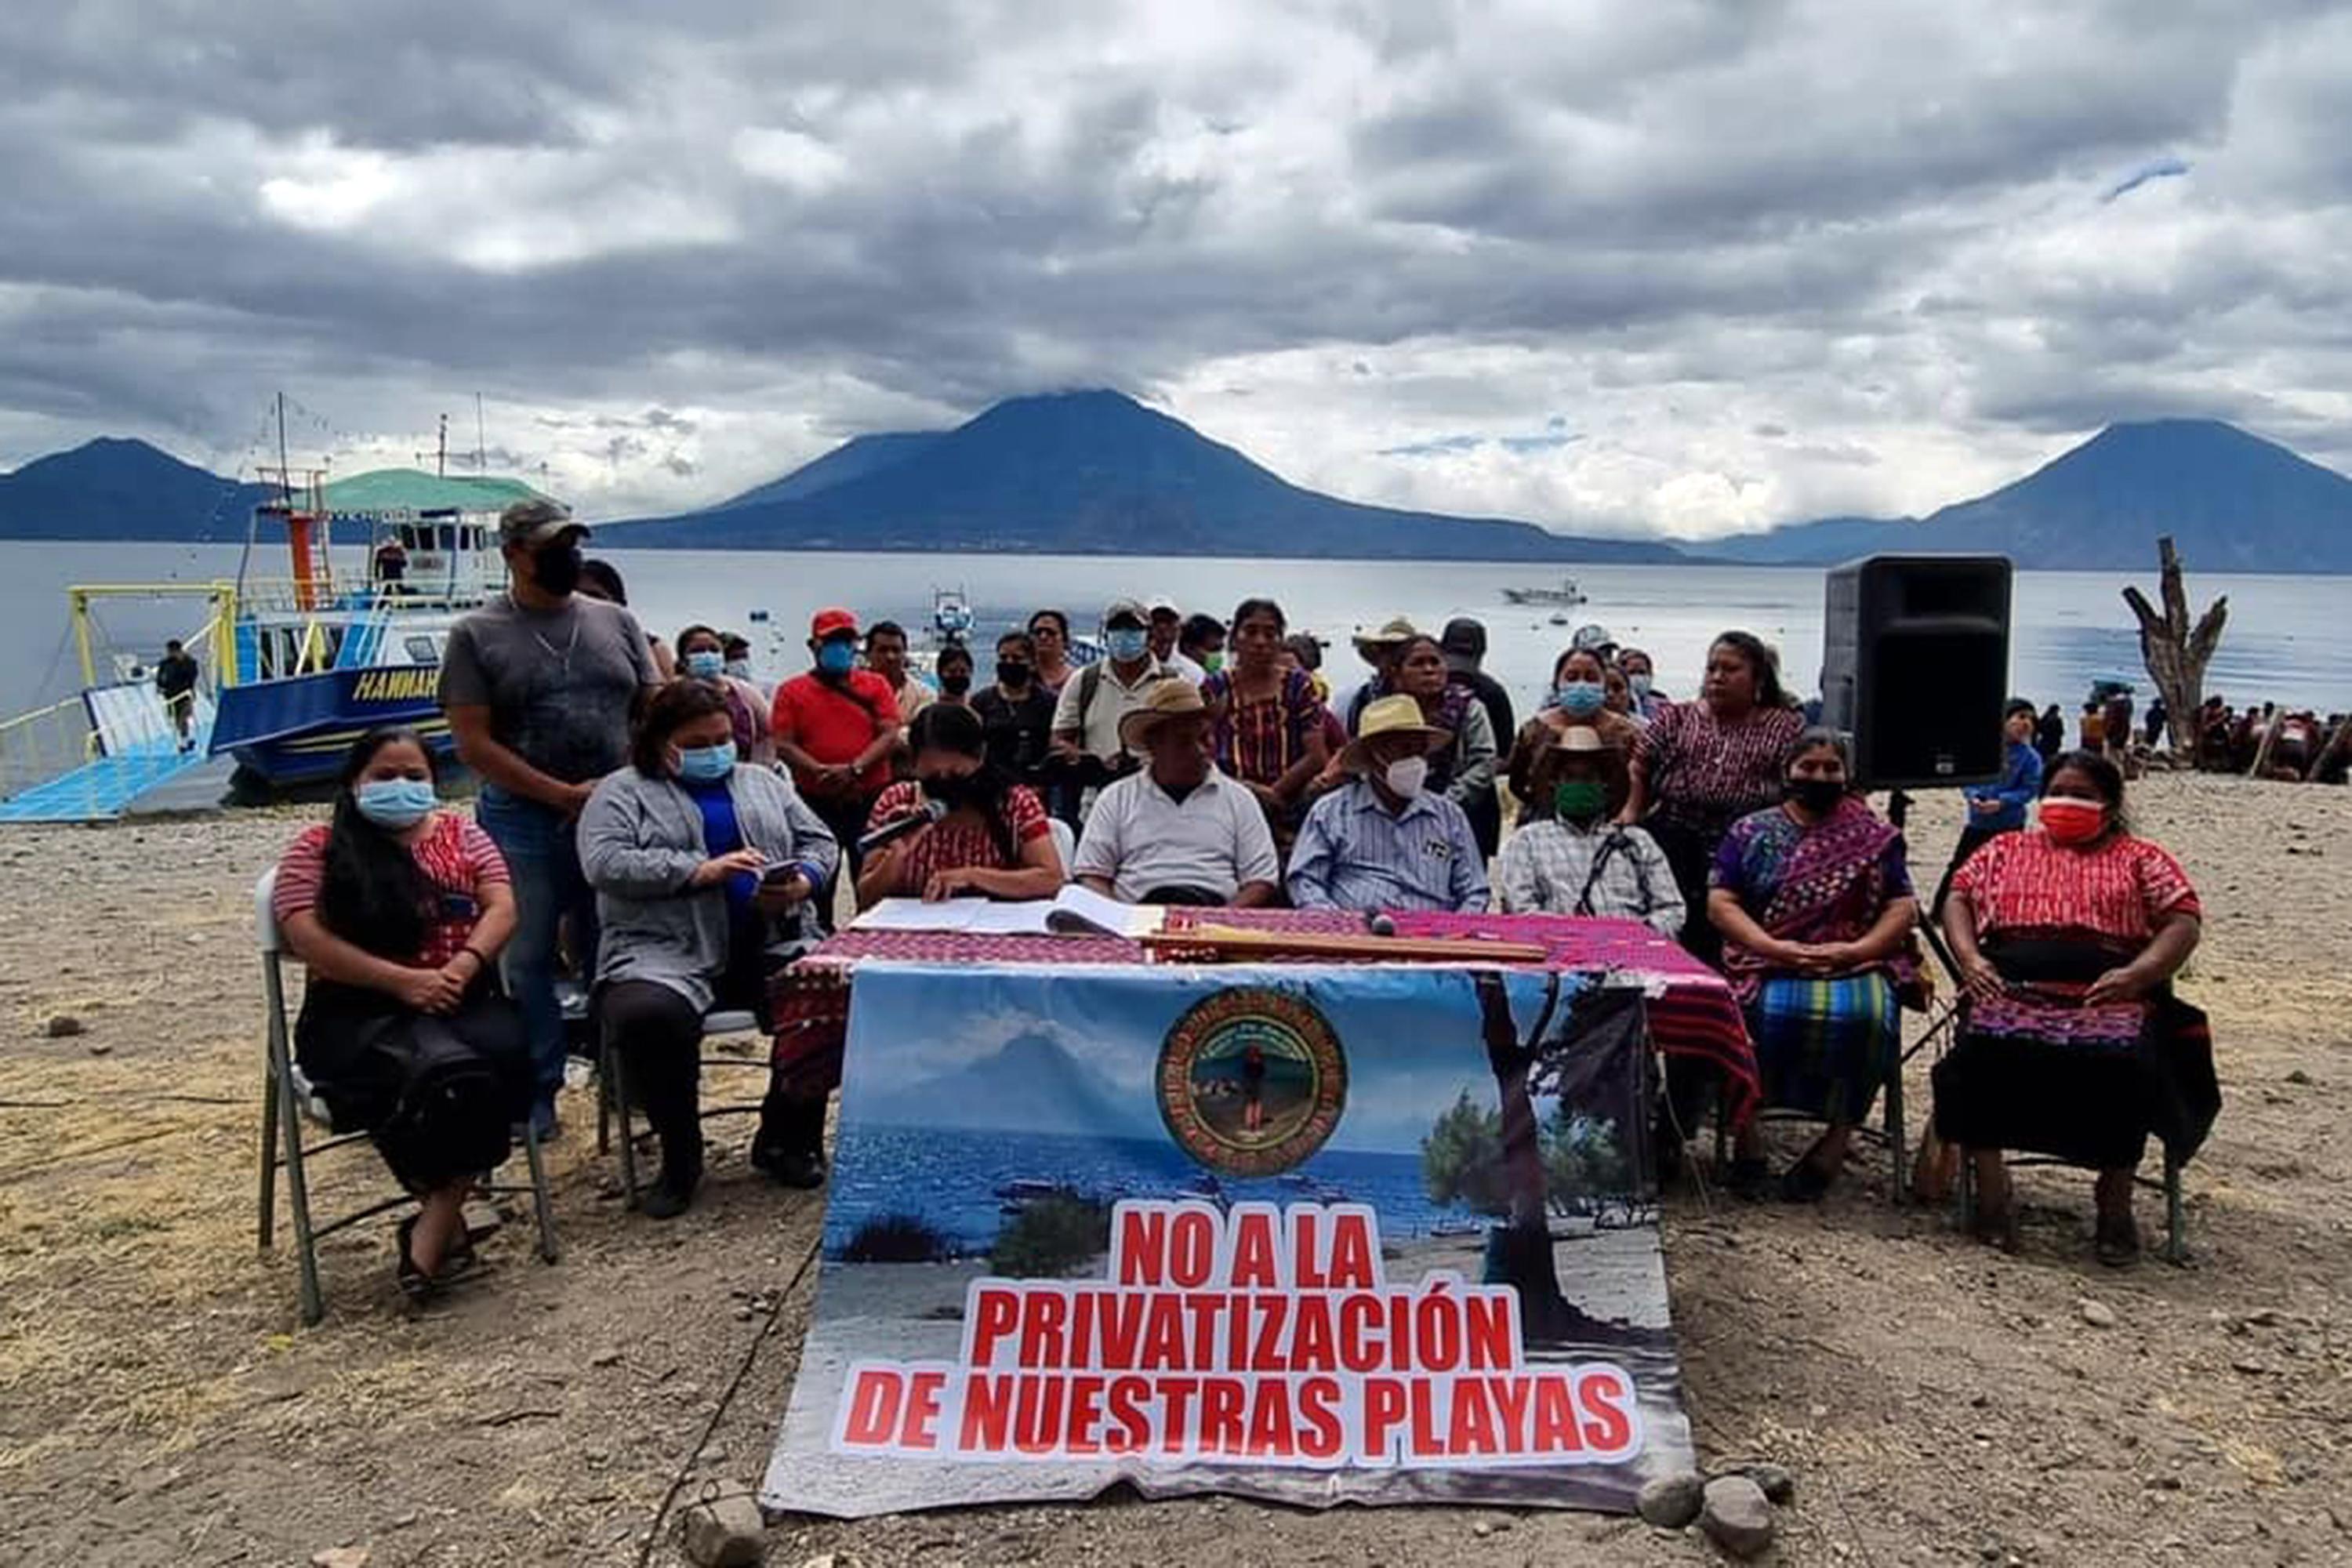 The Council of Elders Riajaw Tinamit Panajachel signed an open letter in January to Mayor César Piedrasanta demanding an end to construction projects on their ancestral lands, especially along the beaches. The Los Salpores Jucanyá Beach Committee and the Communal Commission for Women co-signed. Photo: Facebook page 